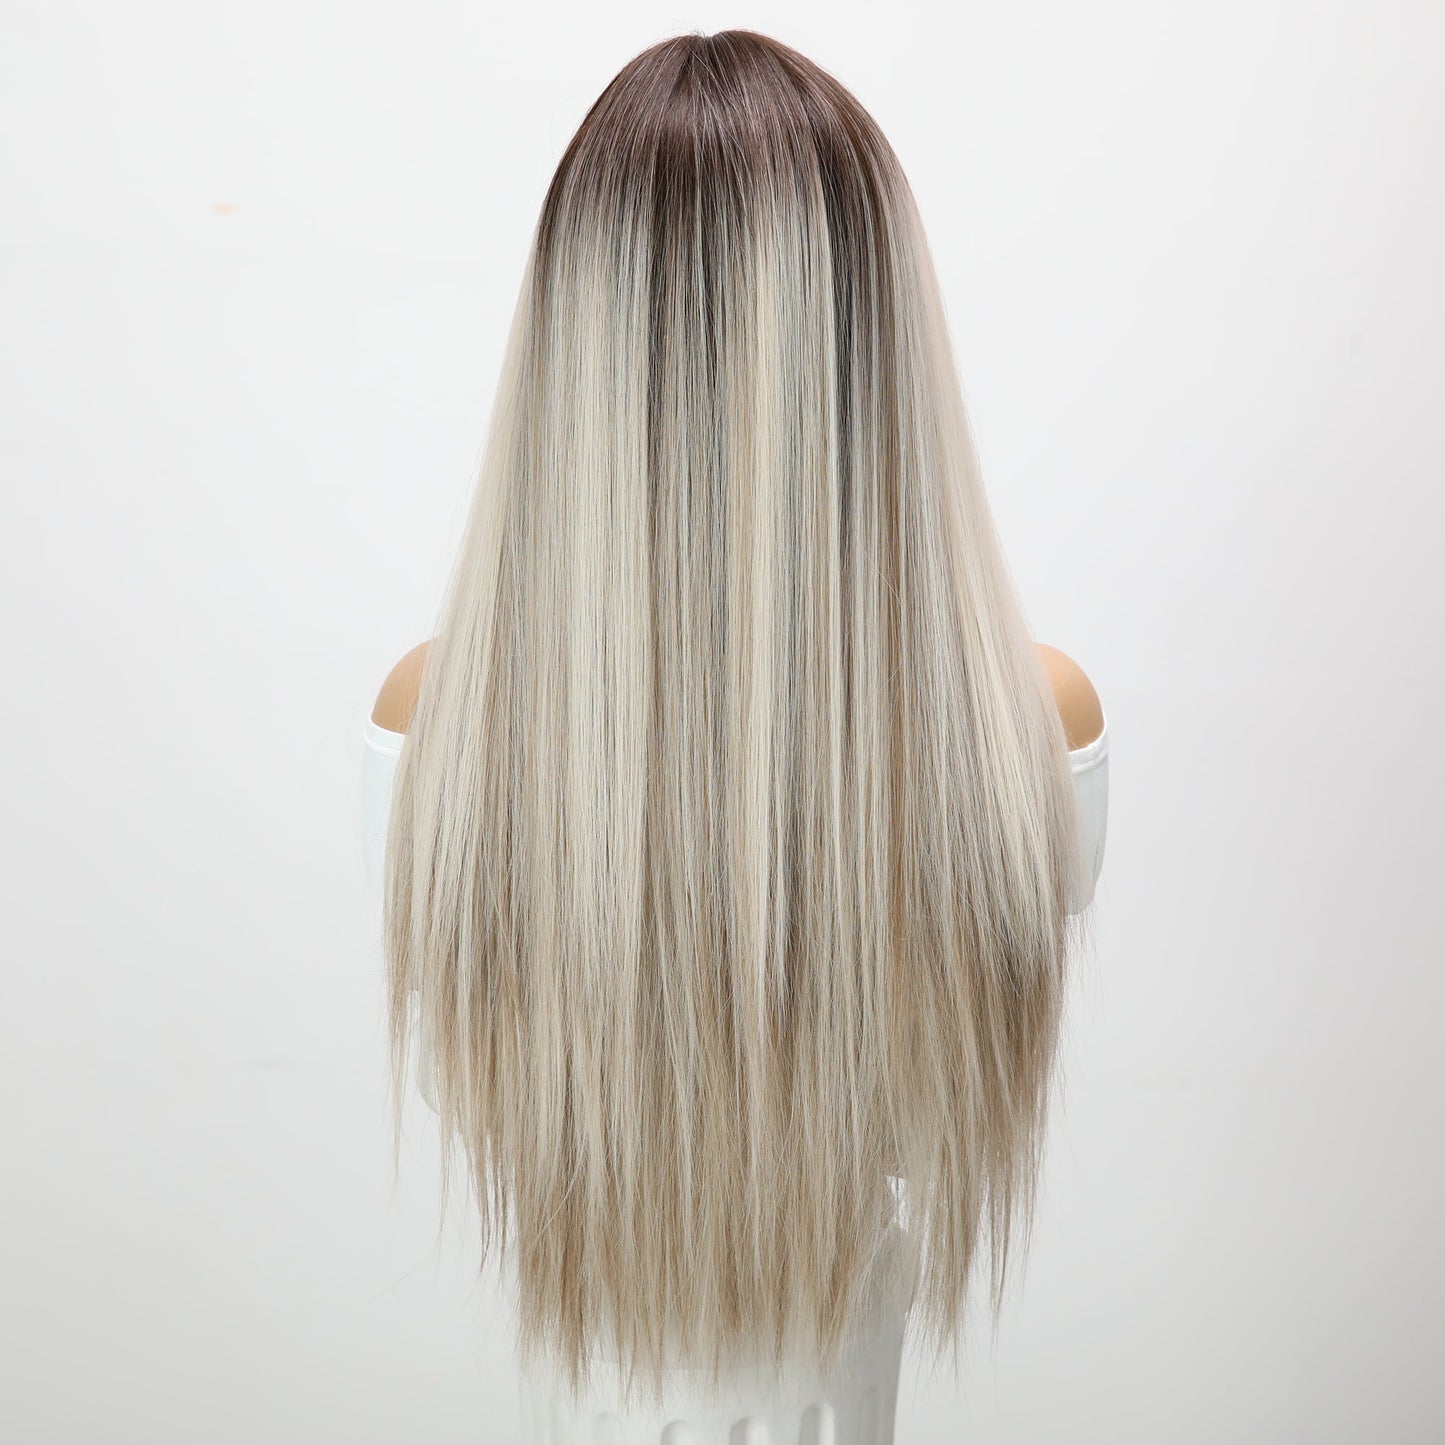 22 Inches | Grey Long Hair | With Hair Bangs | Straight | SM1658 - TapLike